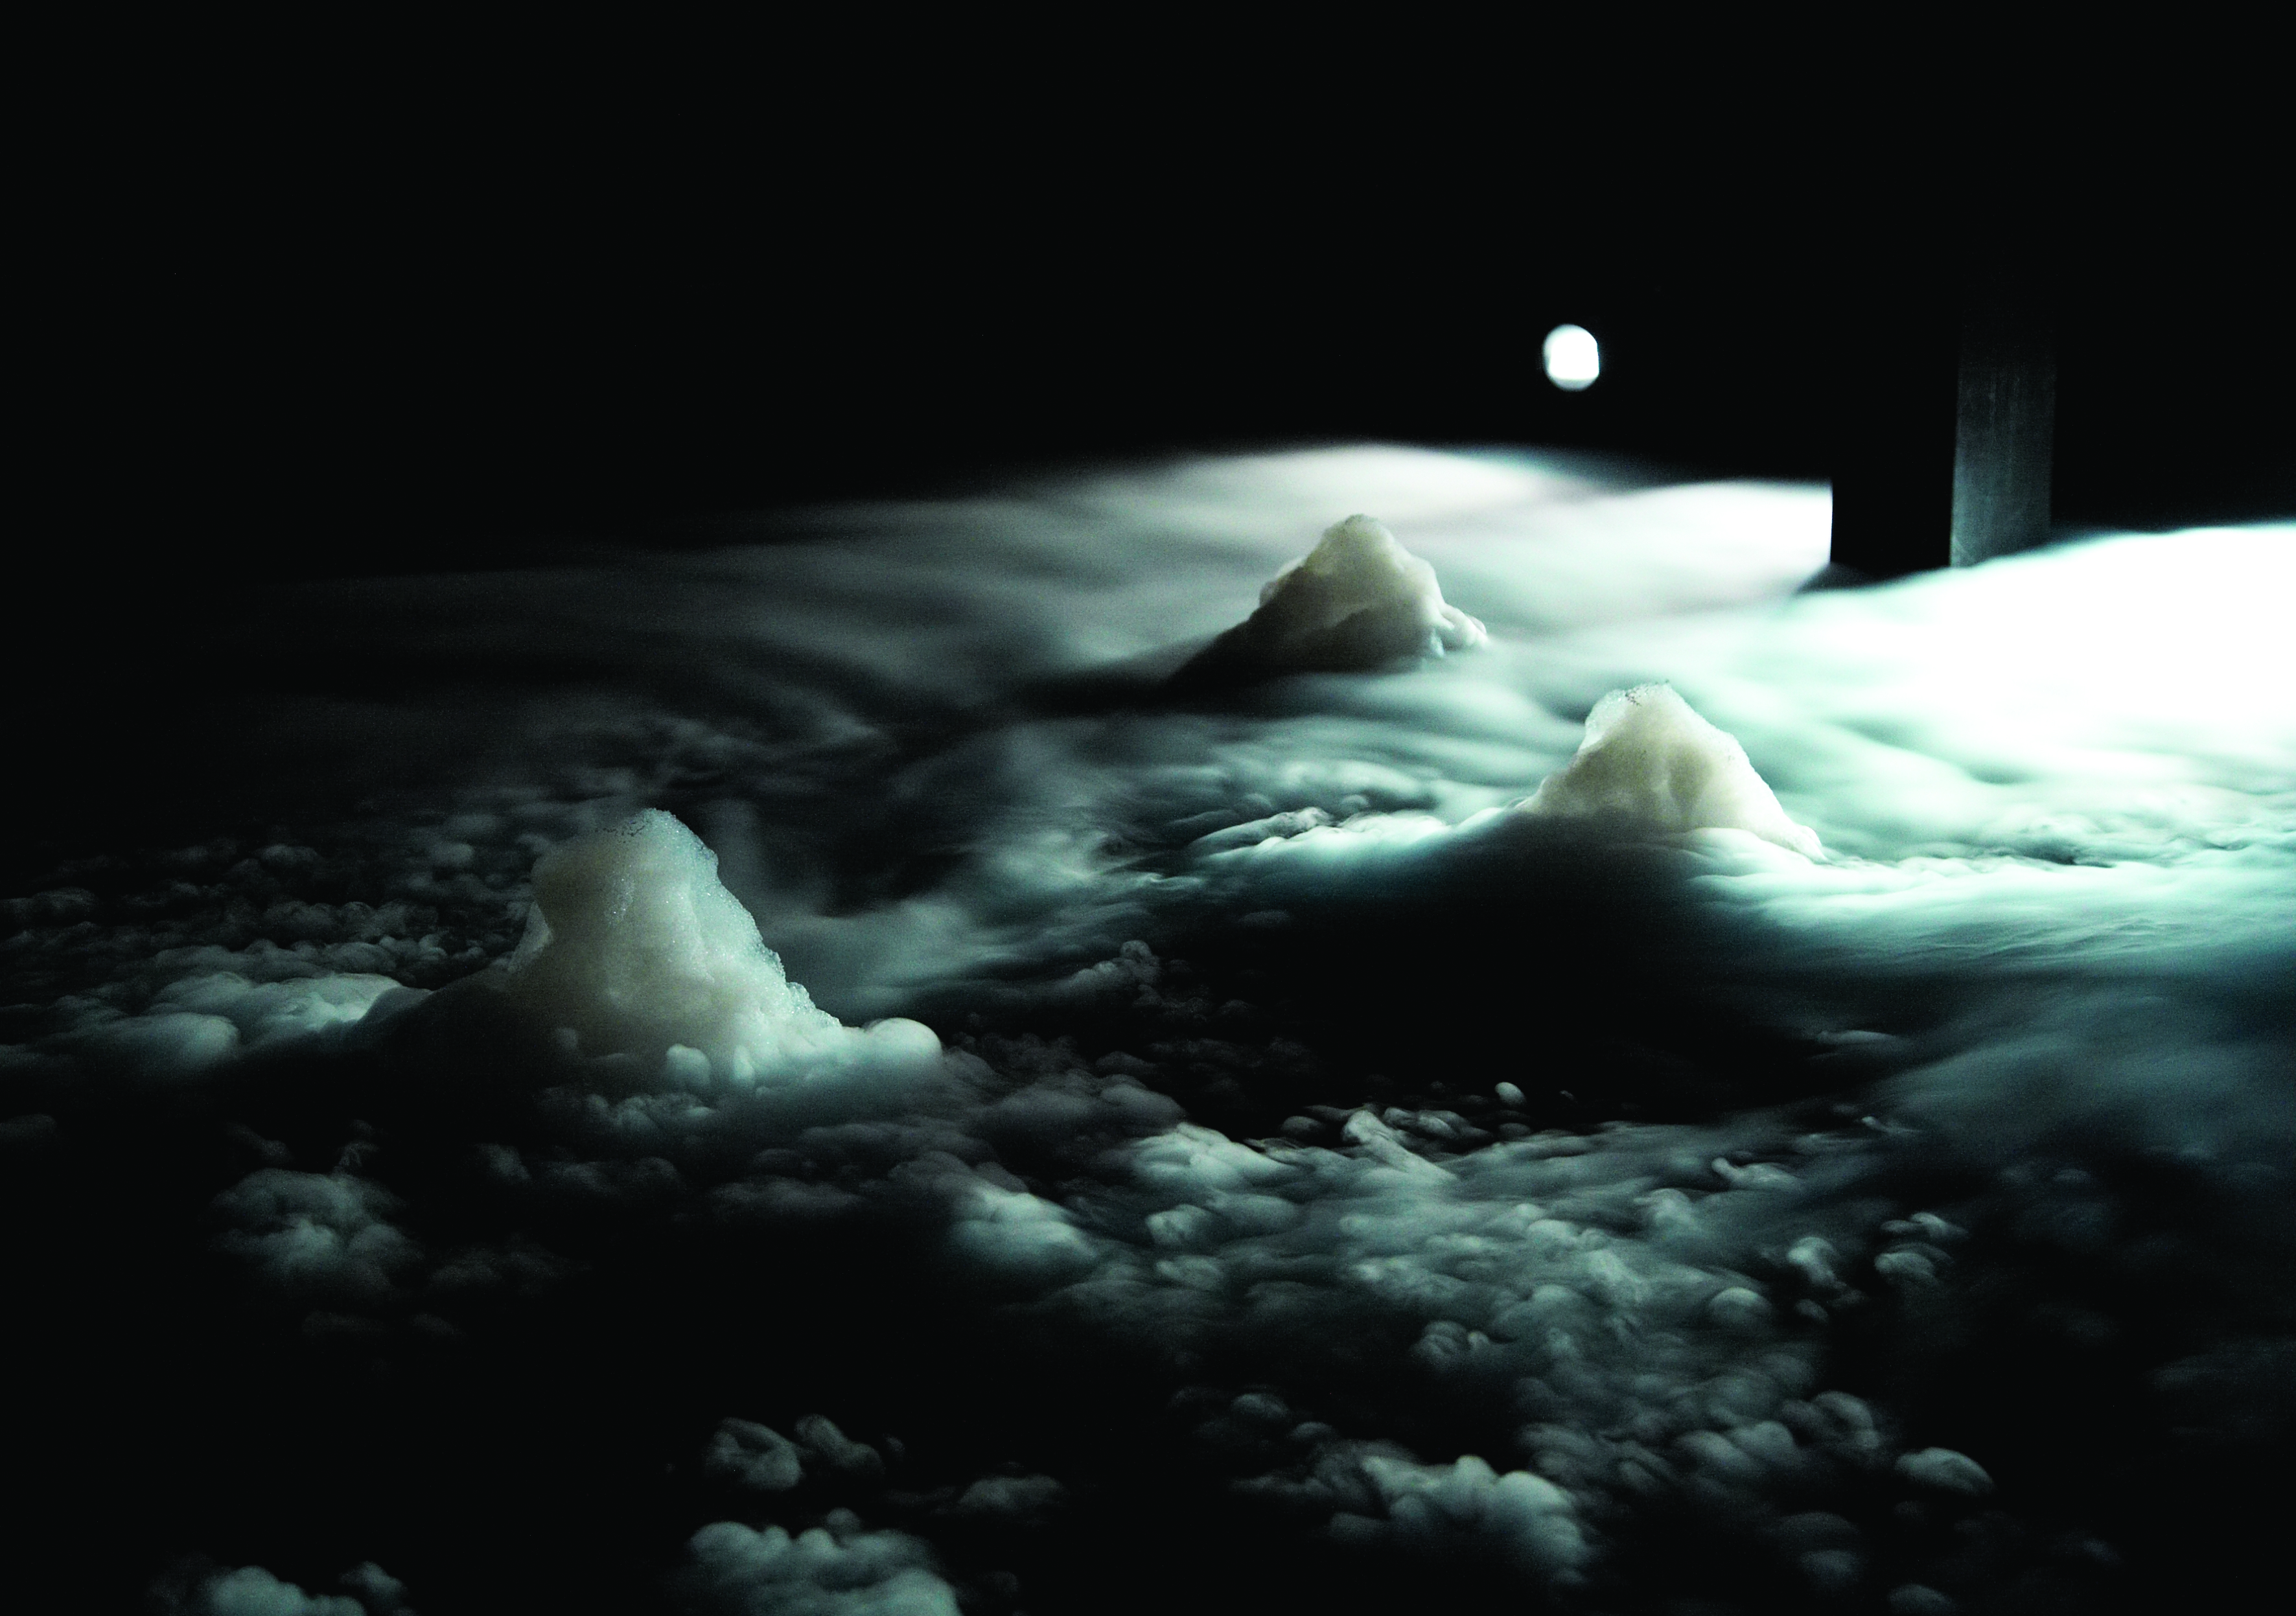 image of cloudy backlit landscape at night, from Mette ingvartsen's Evaporated Landscapes project.